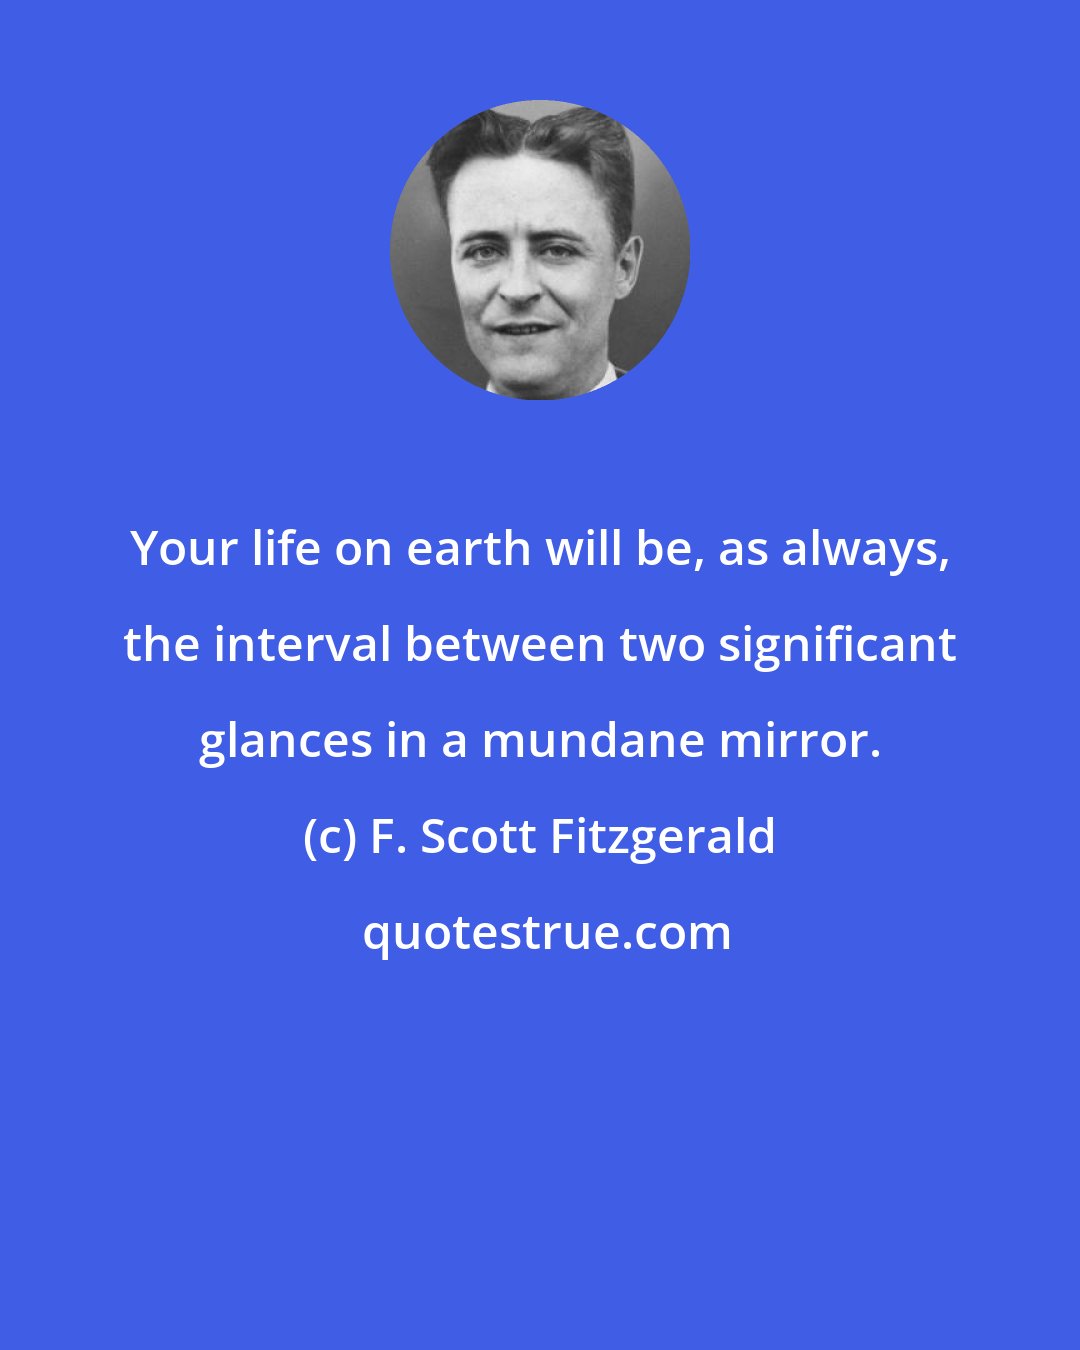 F. Scott Fitzgerald: Your life on earth will be, as always, the interval between two significant glances in a mundane mirror.